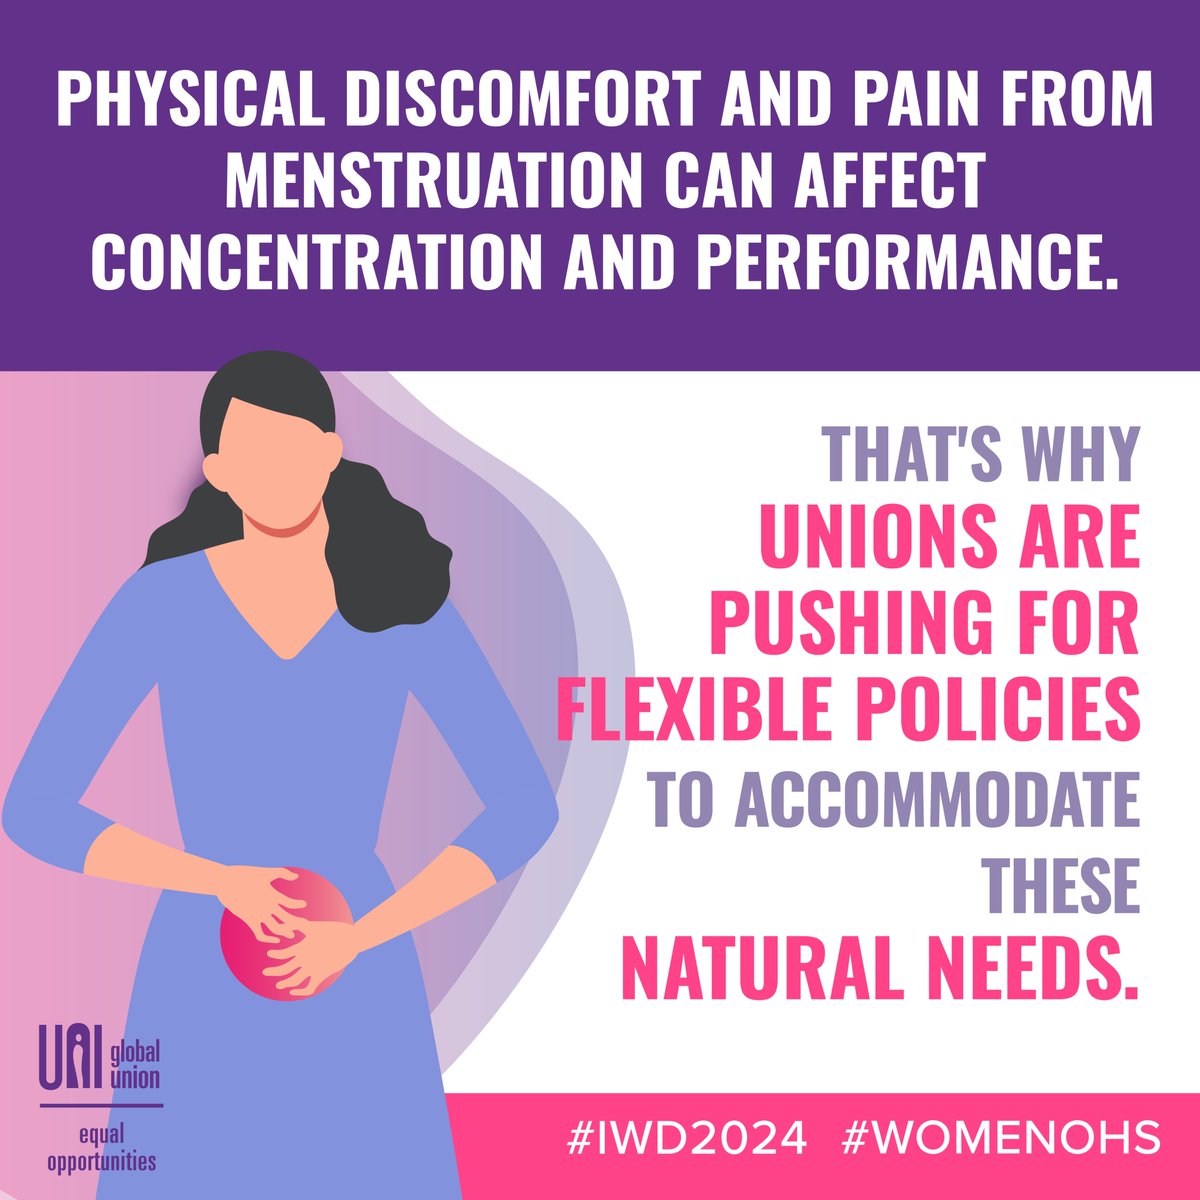 Menstrual cramps have been underestimated and even today these problems are often thought to be imaginary or exaggerated, leading to women suffering unnecessarily only to be diagnosed with a medical condition later in life. It is time we break the silence! #IWD2024 #womenOHS